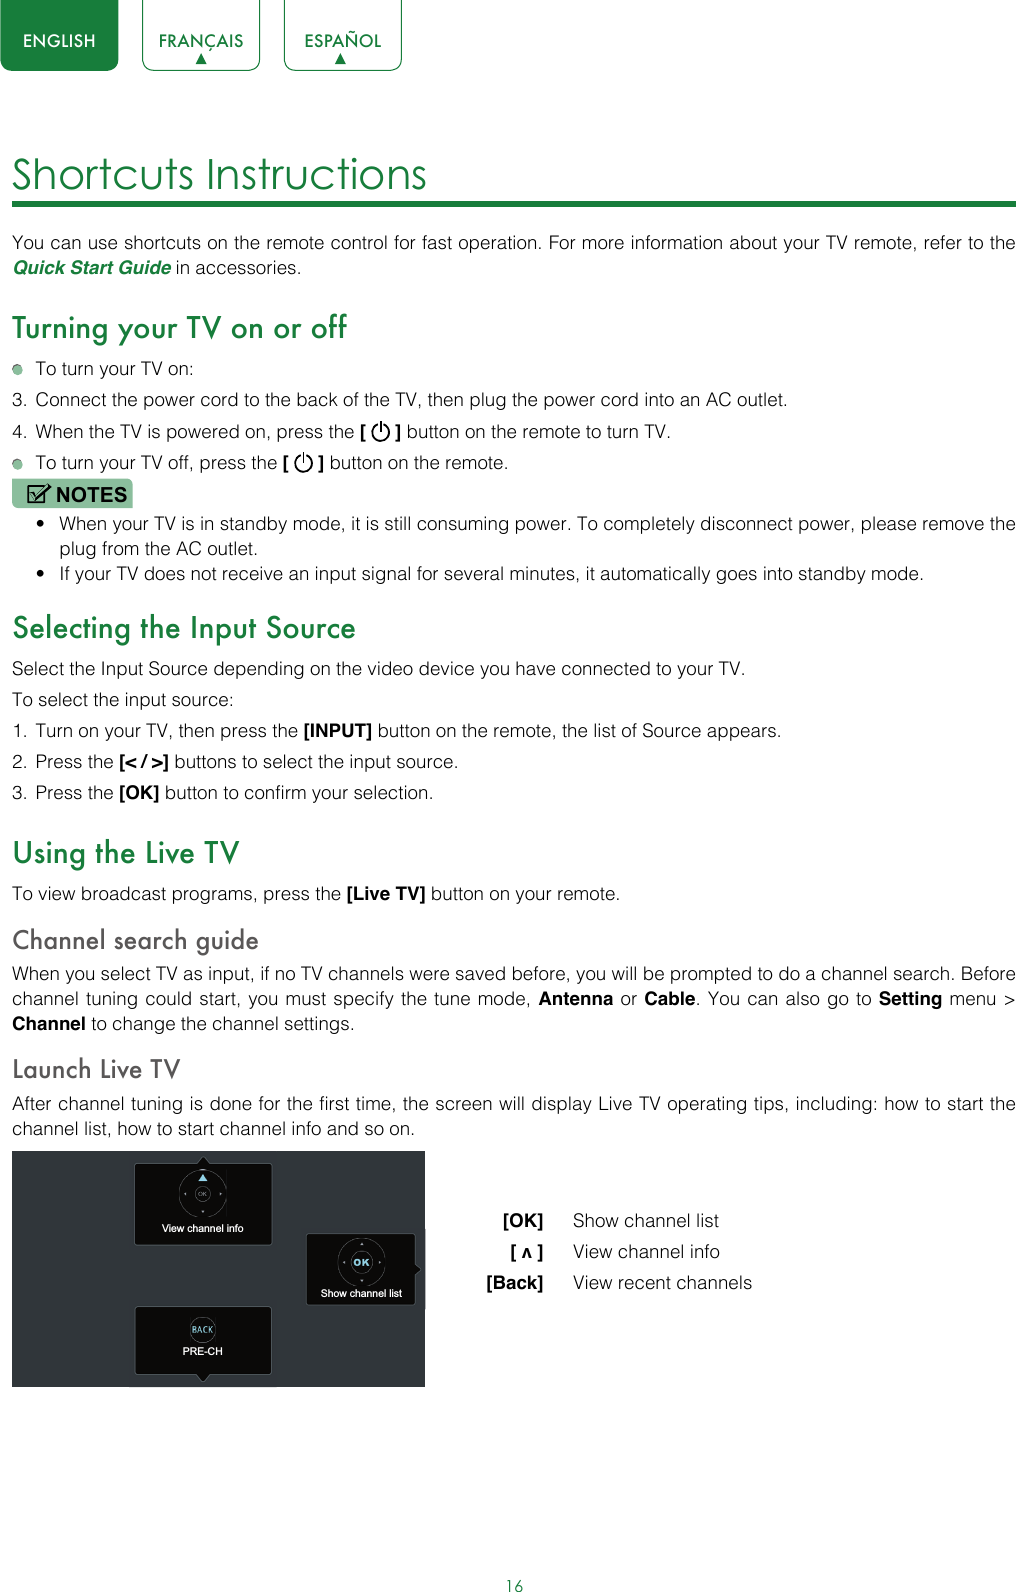 16ENGLISH FRANÇAIS ESPAÑOLShortcuts Instructions You can use shortcuts on the remote control for fast operation. For more information about your TV remote, refer to the Quick Start Guide in accessories.Turning your TV on or off  To turn your TV on:3.  Connect the power cord to the back of the TV, then plug the power cord into an AC outlet.4.  When the TV is powered on, press the [   ] button on the remote to turn TV.  To turn your TV off, press the [   ] button on the remote.NOTES• When your TV is in standby mode, it is still consuming power. To completely disconnect power, please remove the  plug from the AC outlet.• If your TV does not receive an input signal for several minutes, it automatically goes into standby mode.Selecting the Input SourceSelect the Input Source depending on the video device you have connected to your TV.To select the input source:1.  Turn on your TV, then press the [INPUT] button on the remote, the list of Source appears.2.  Press the [&lt; / &gt;] buttons to select the input source.3.  Press the [OK] button to confirm your selection.Using the Live TVTo view broadcast programs, press the [Live TV] button on your remote.Channel search guideWhen you select TV as input, if no TV channels were saved before, you will be prompted to do a channel search. Before channel tuning could start, you must specify the tune mode, Antenna or Cable. You can also go to Setting menu &gt; Channel to change the channel settings.Launch Live TVAfter channel tuning is done for the first time, the screen will display Live TV operating tips, including: how to start the channel list, how to start channel info and so on.  [OK]   Show channel list [ v ]   View channel info [Back]   View recent channelsView channel infoPRE-CHShow channel list